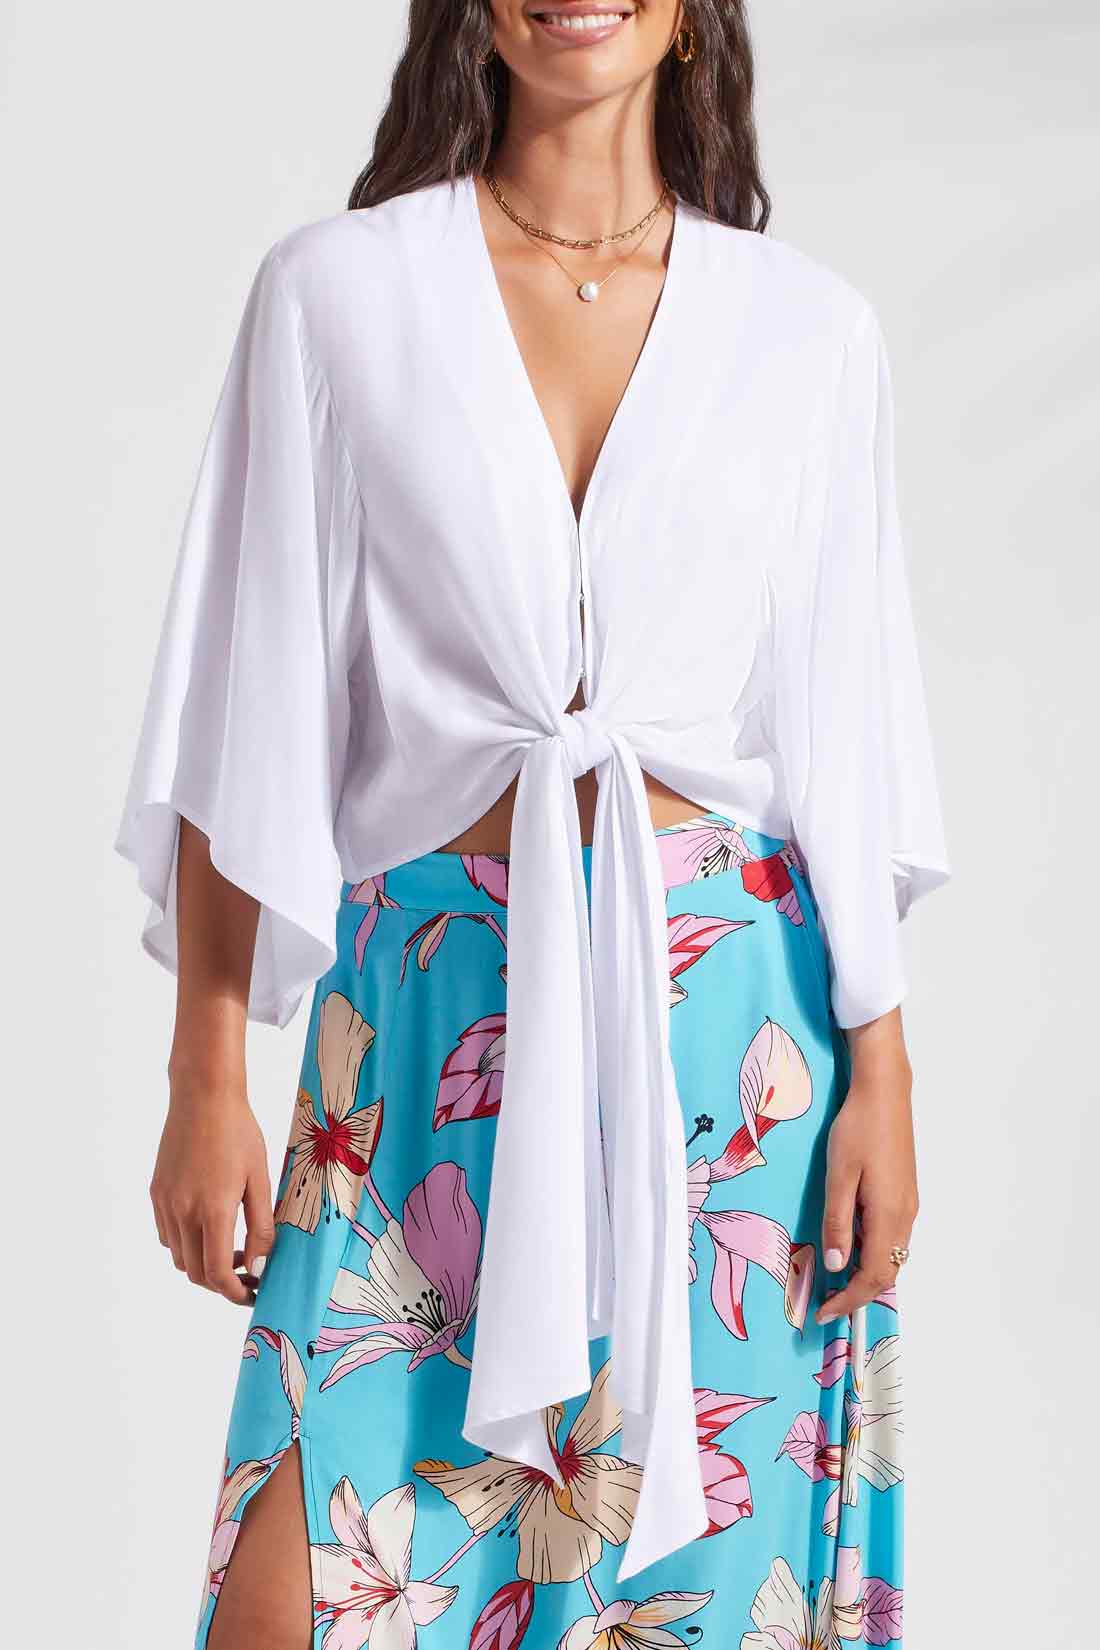 Kimono Top with Front Tie by Tribal